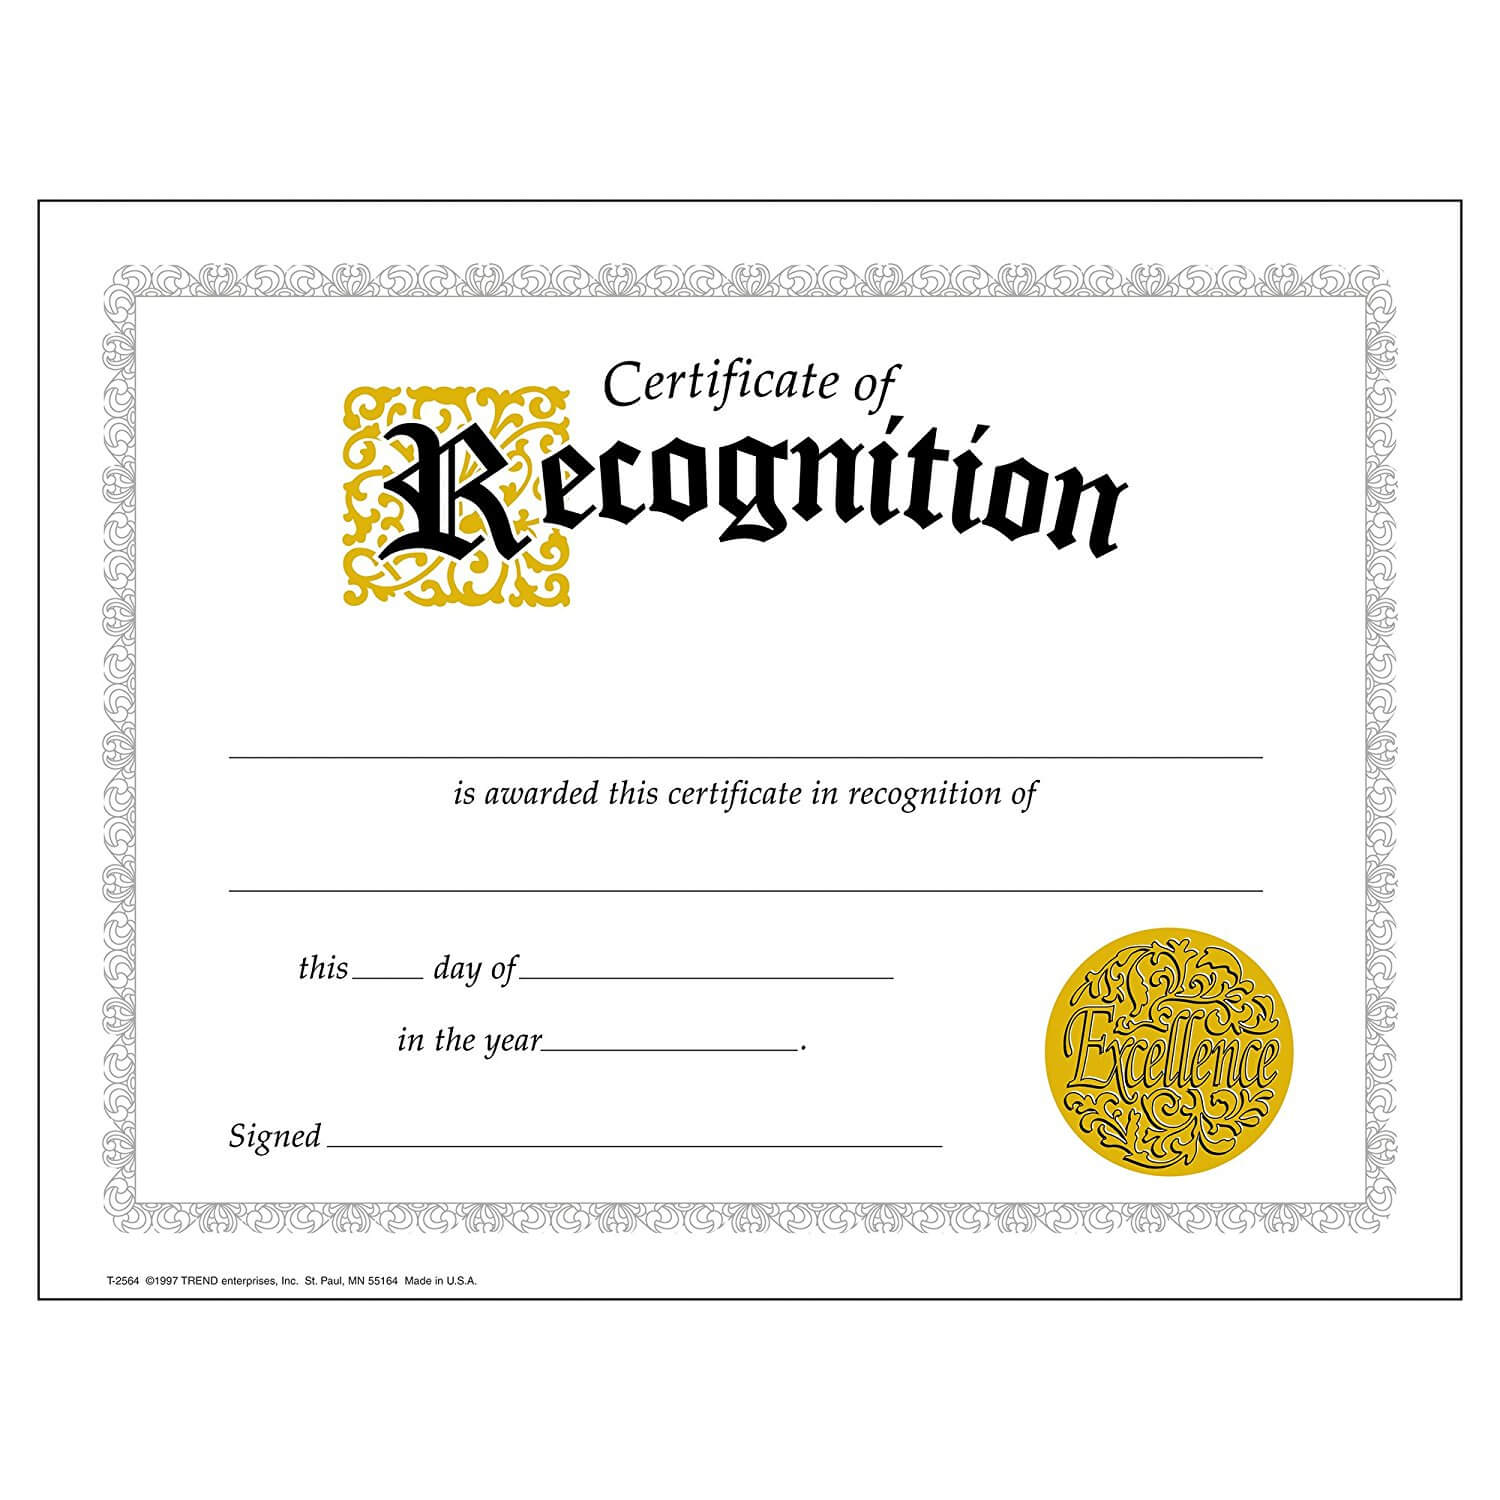 Certificate Of Recognition Template Word 10 Ndash Elsik Blue With Regard To Certificate Of Recognition Word Template